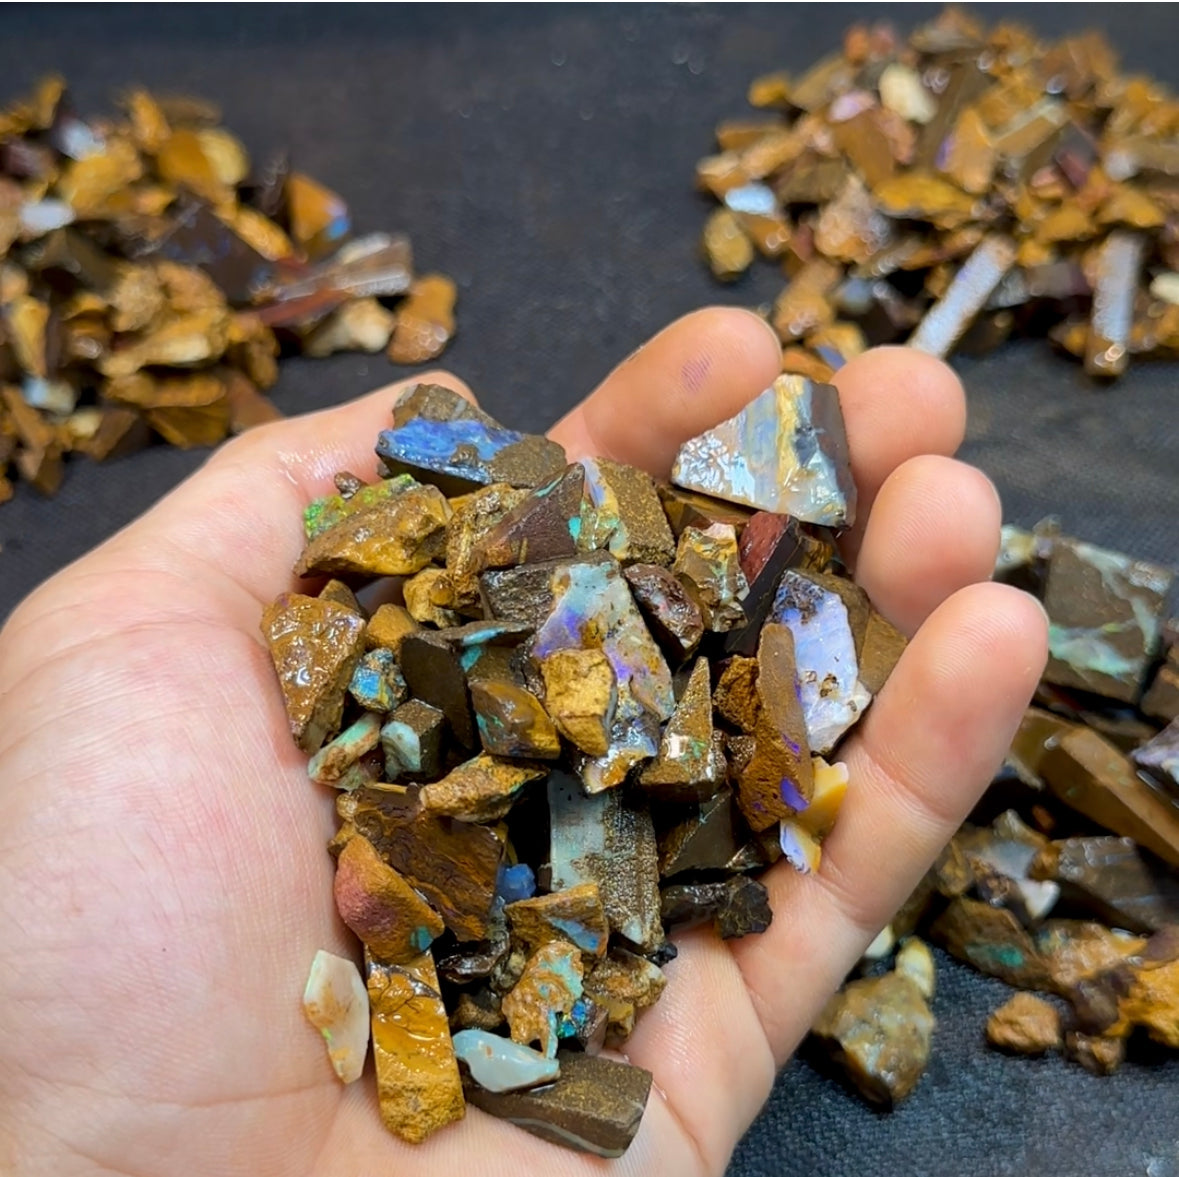 180g - Small/Tiny Boulder Opal Rough Chips and Off Cuts - Opal Whisperers